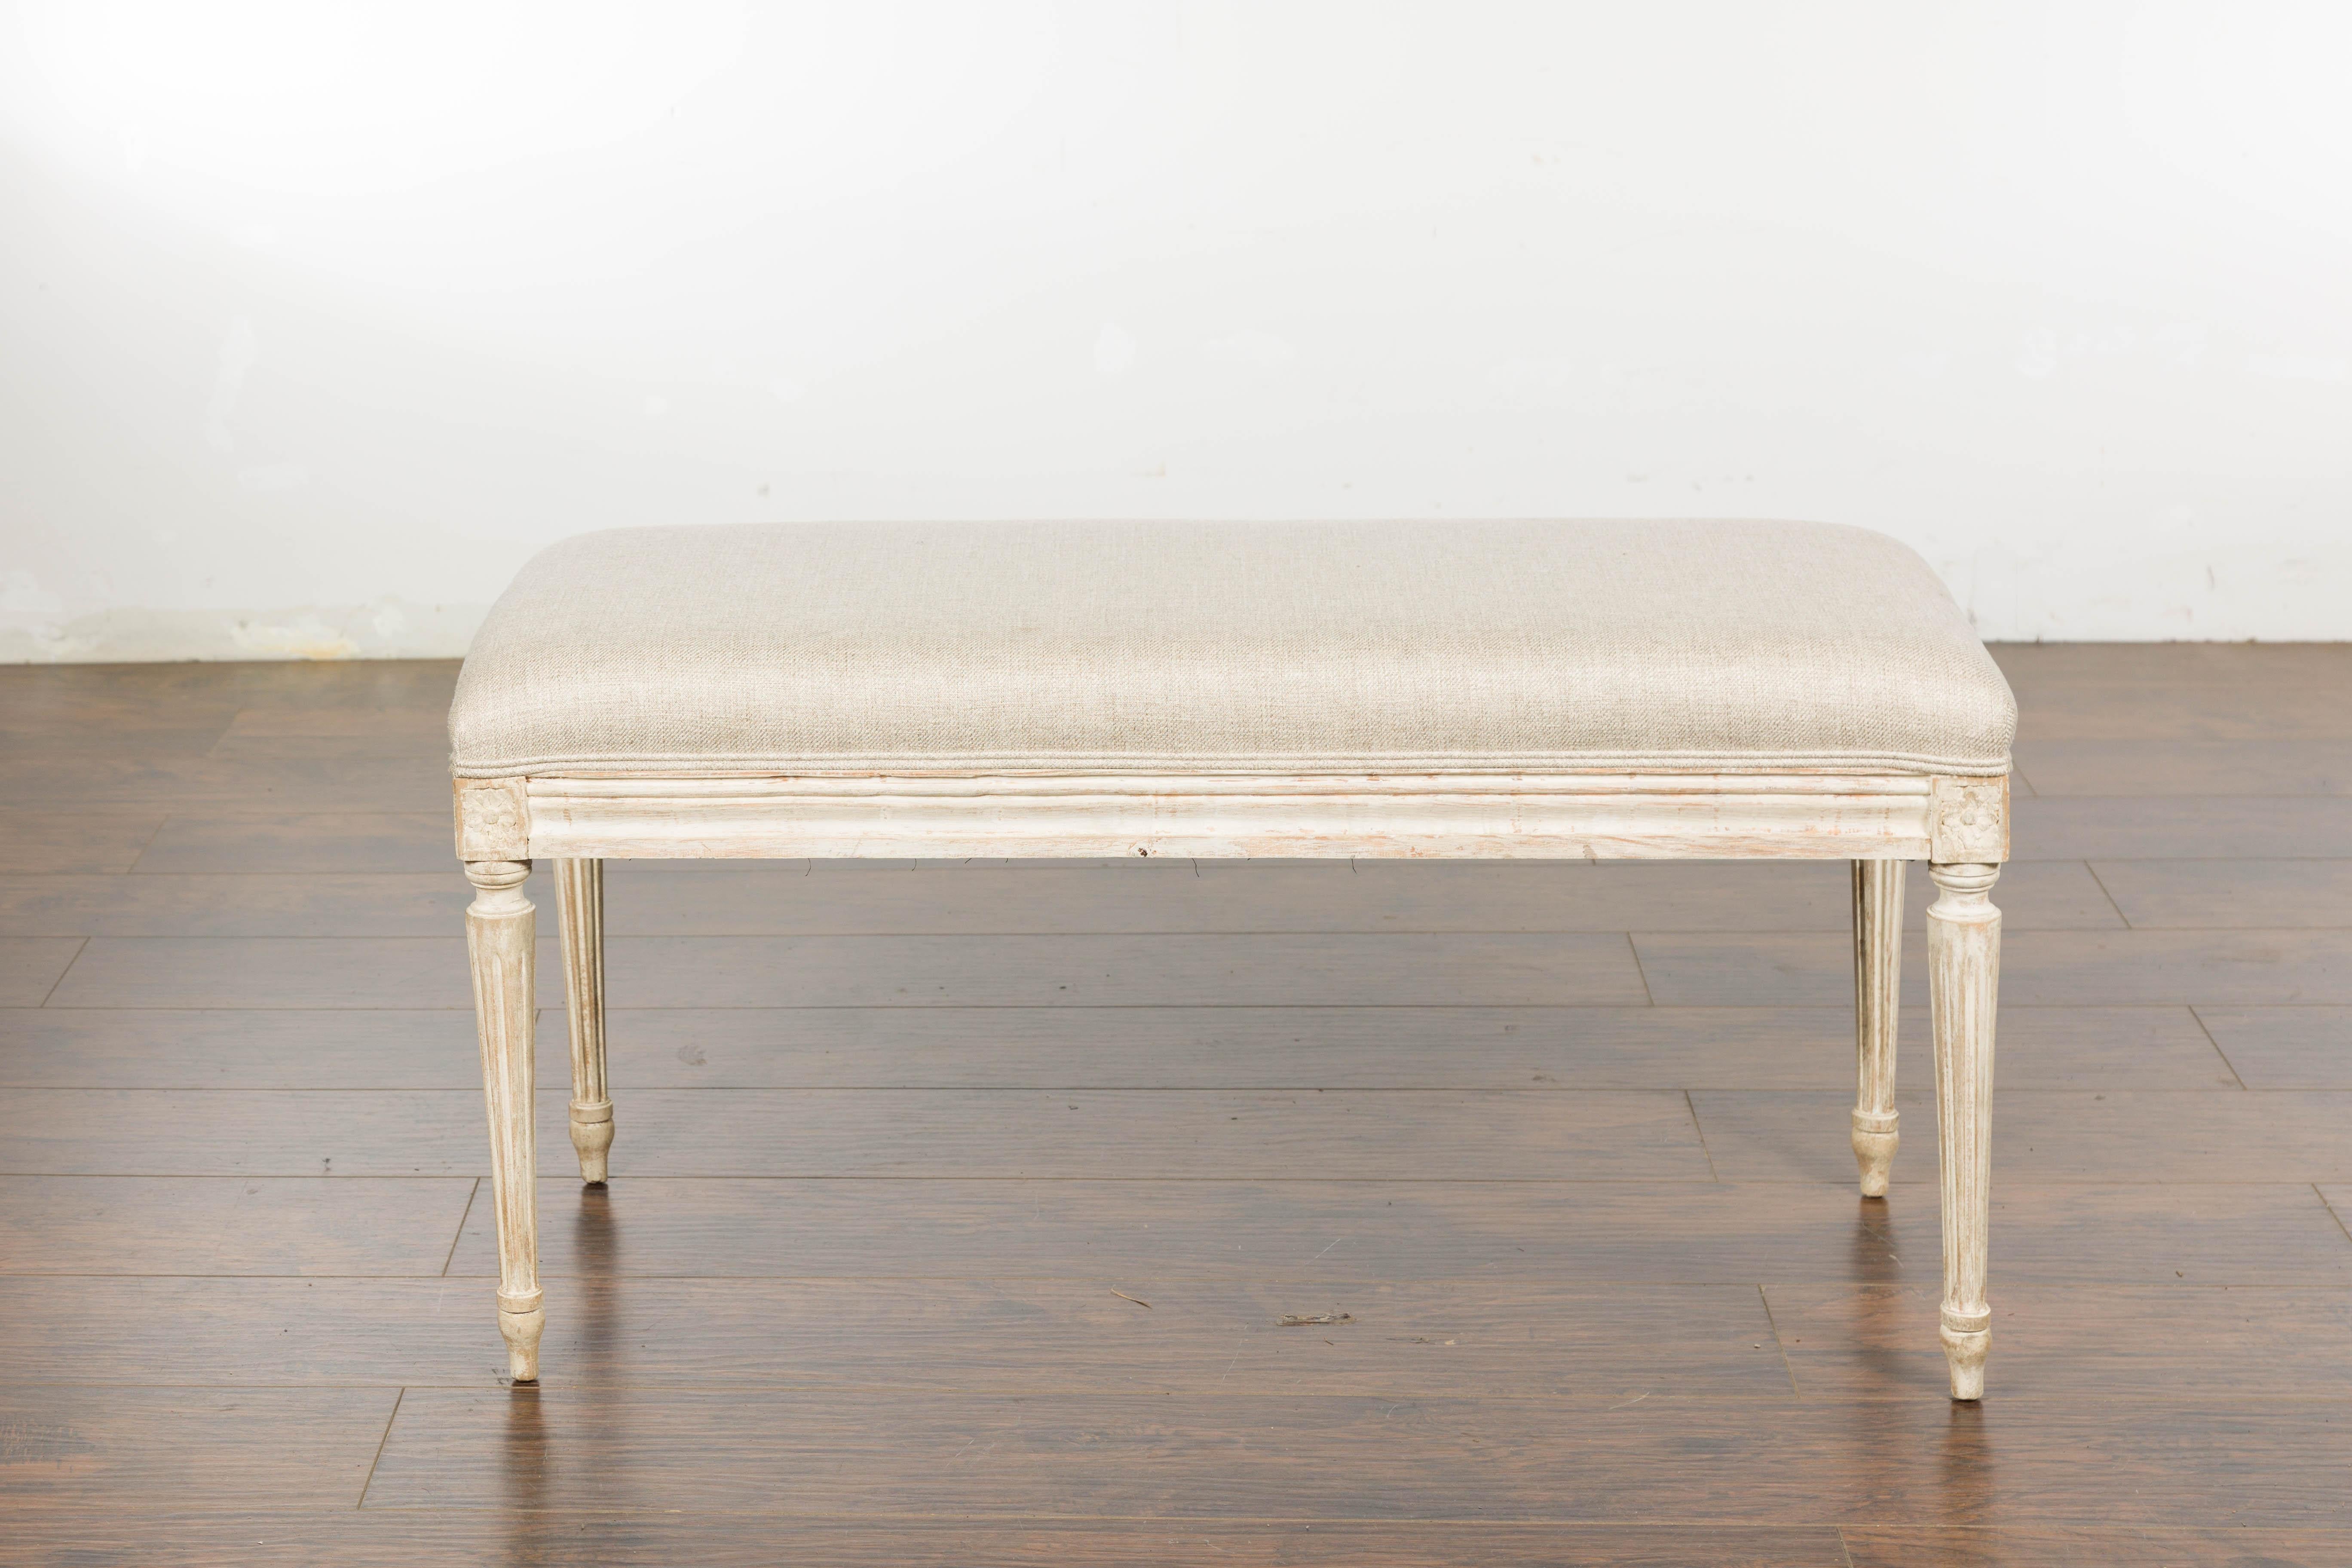 A French Neoclassical style painted walnut bench from circa 1900 with carved décor and new custom upholstered seat. Immerse yourself in a wave of elegance with this French Neoclassical style walnut bench from circa 1900. This beautifully designed